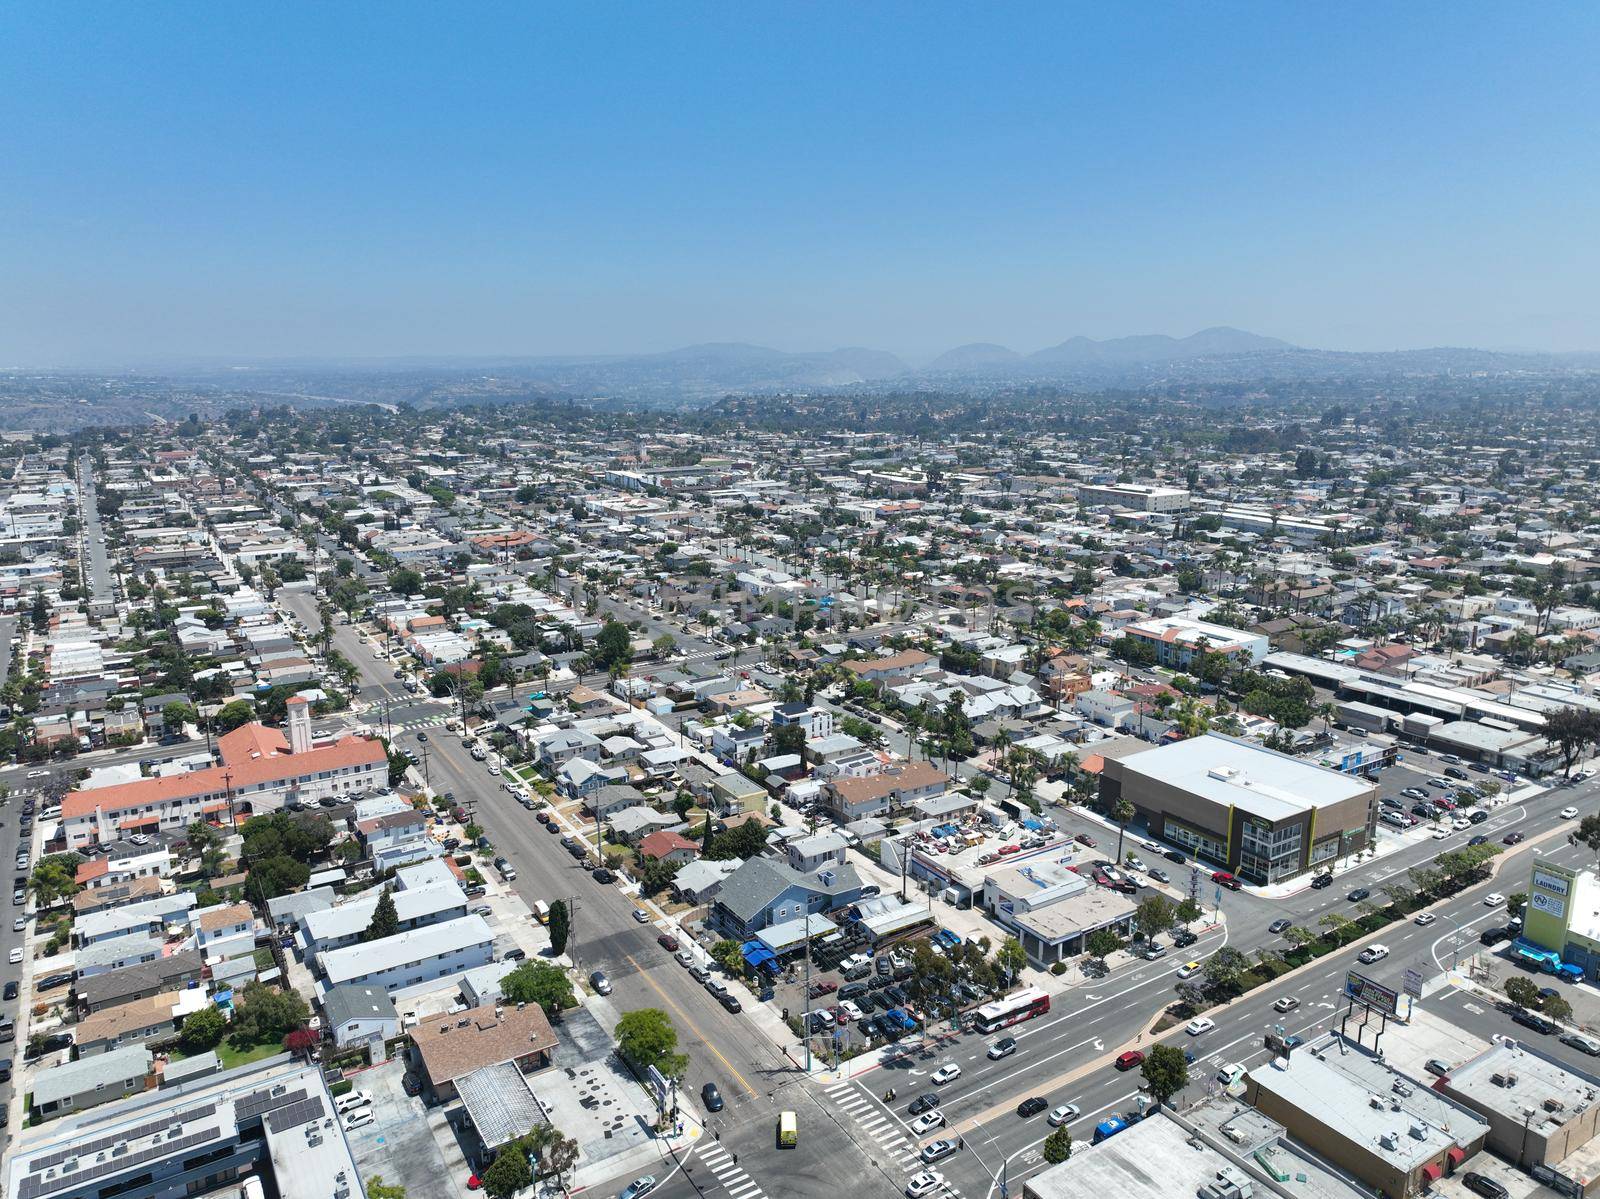 Aerial view of North Park neighborhood in San Diego, California, United States.